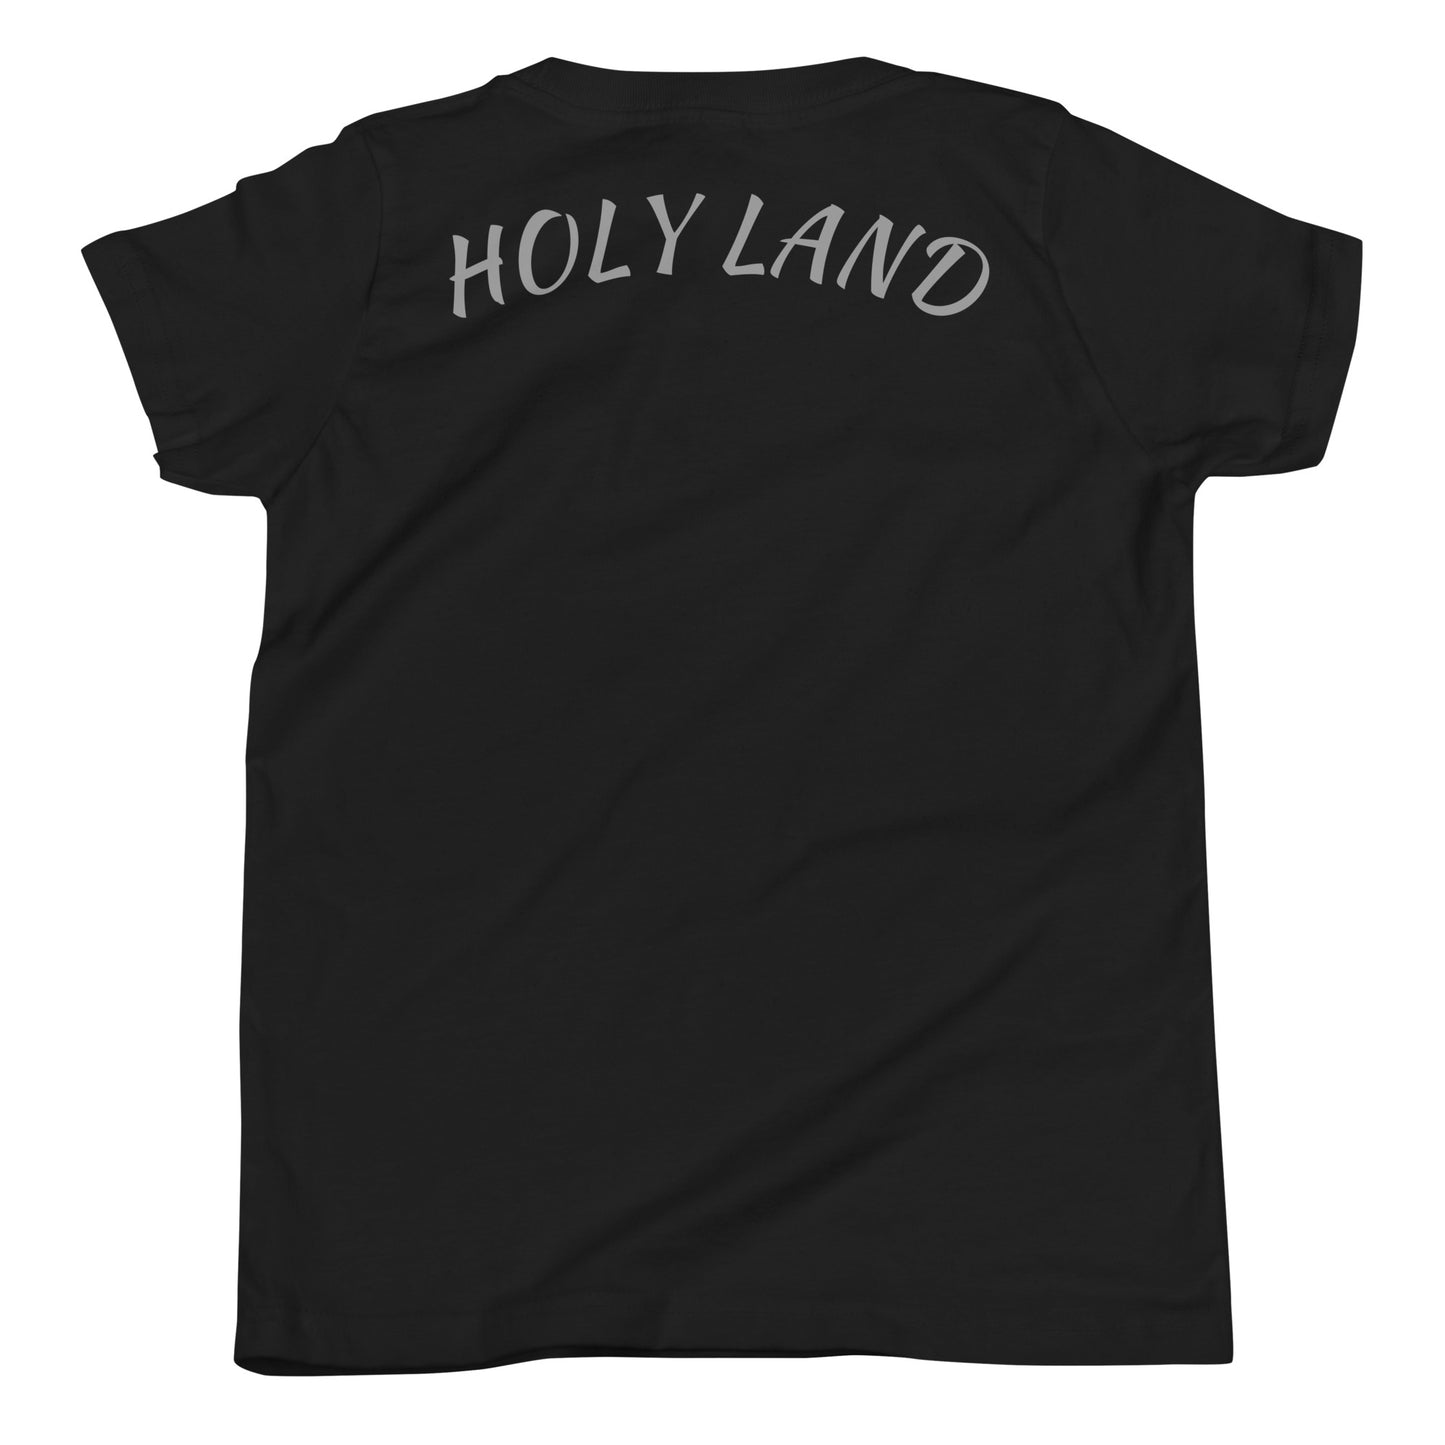 Holy Land for Youth Short Sleeve T-Shirt By Halal Cultures